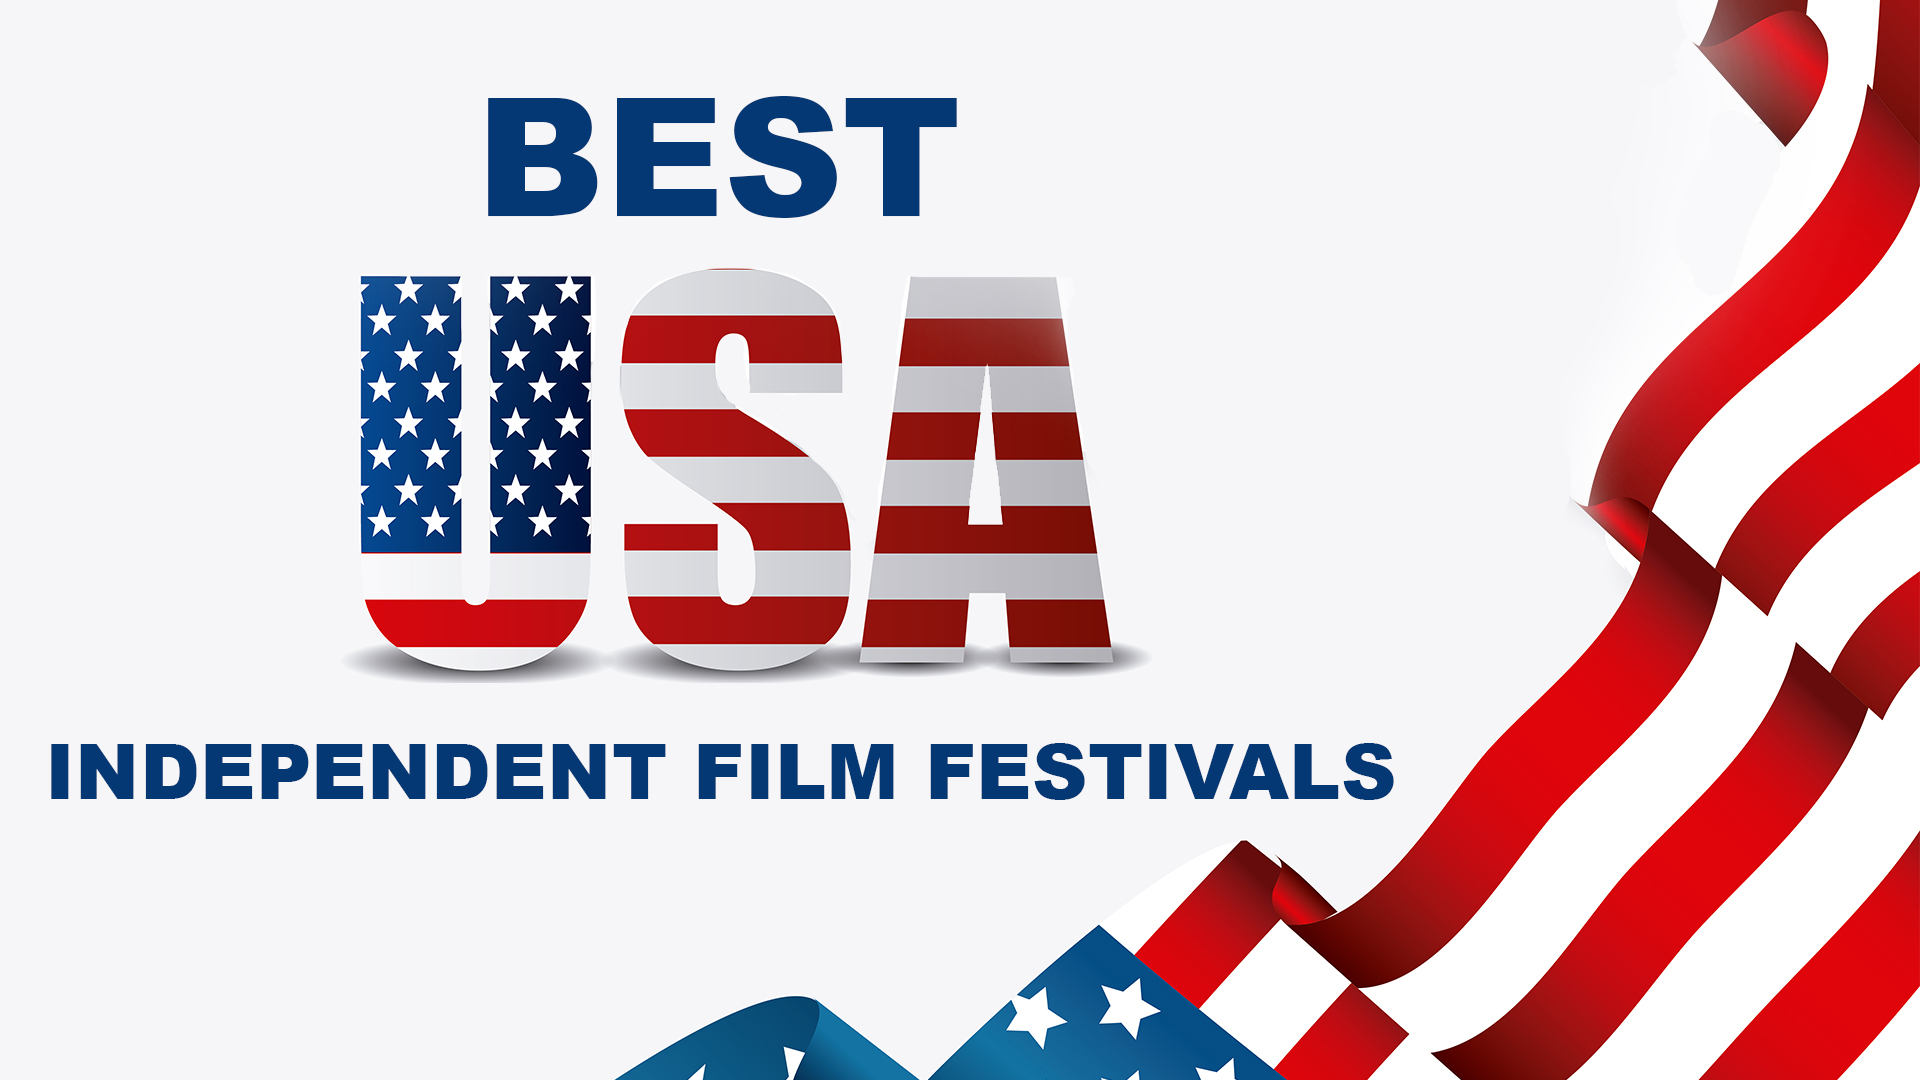 What are the popular best US Independent Film Festivals?